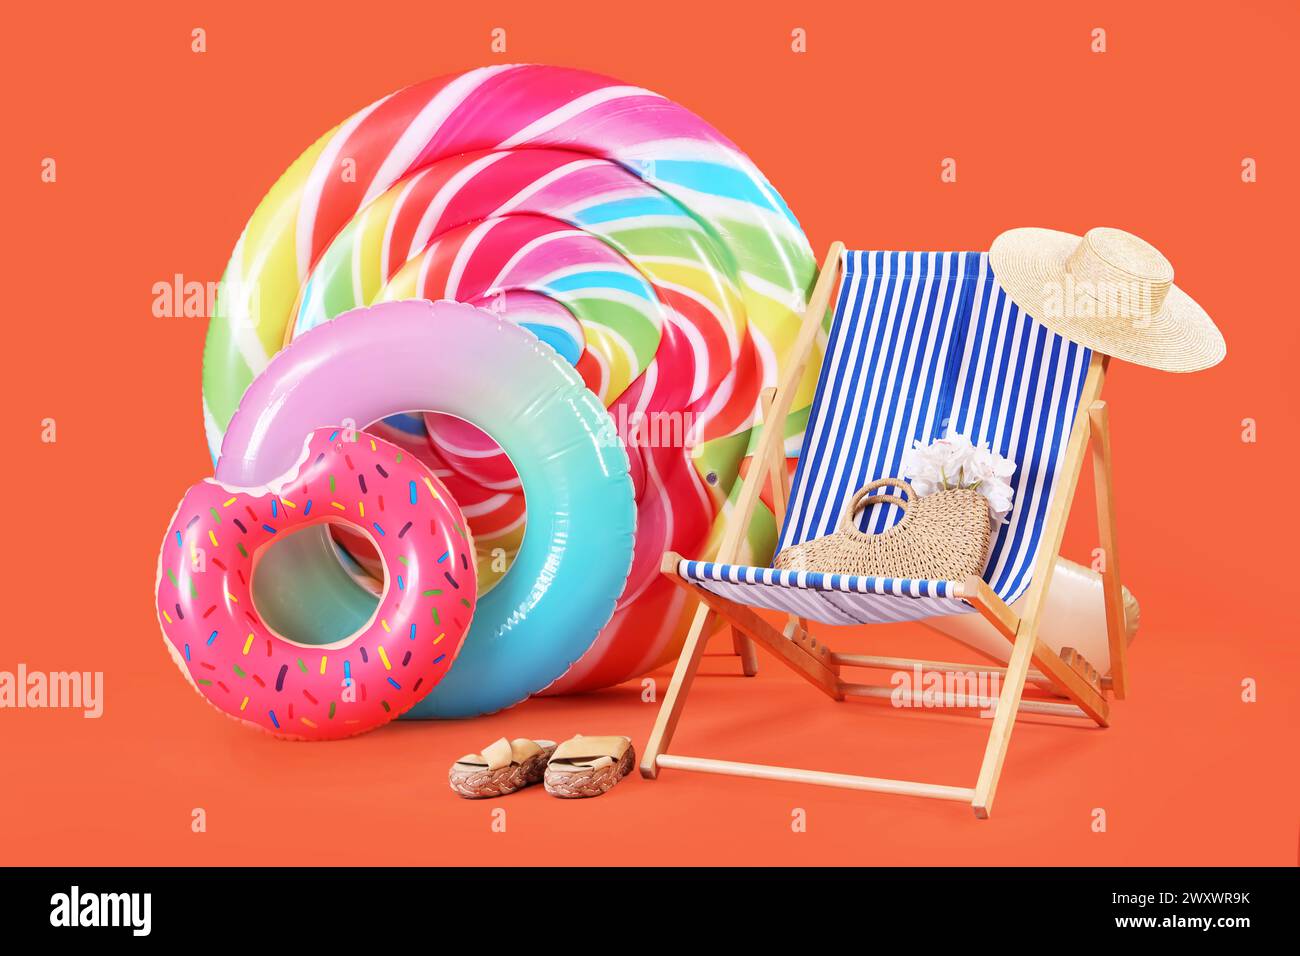 Swimming mattress in shape of candy, inflatable rings and sun lounger with straw hat on orange background Stock Photo